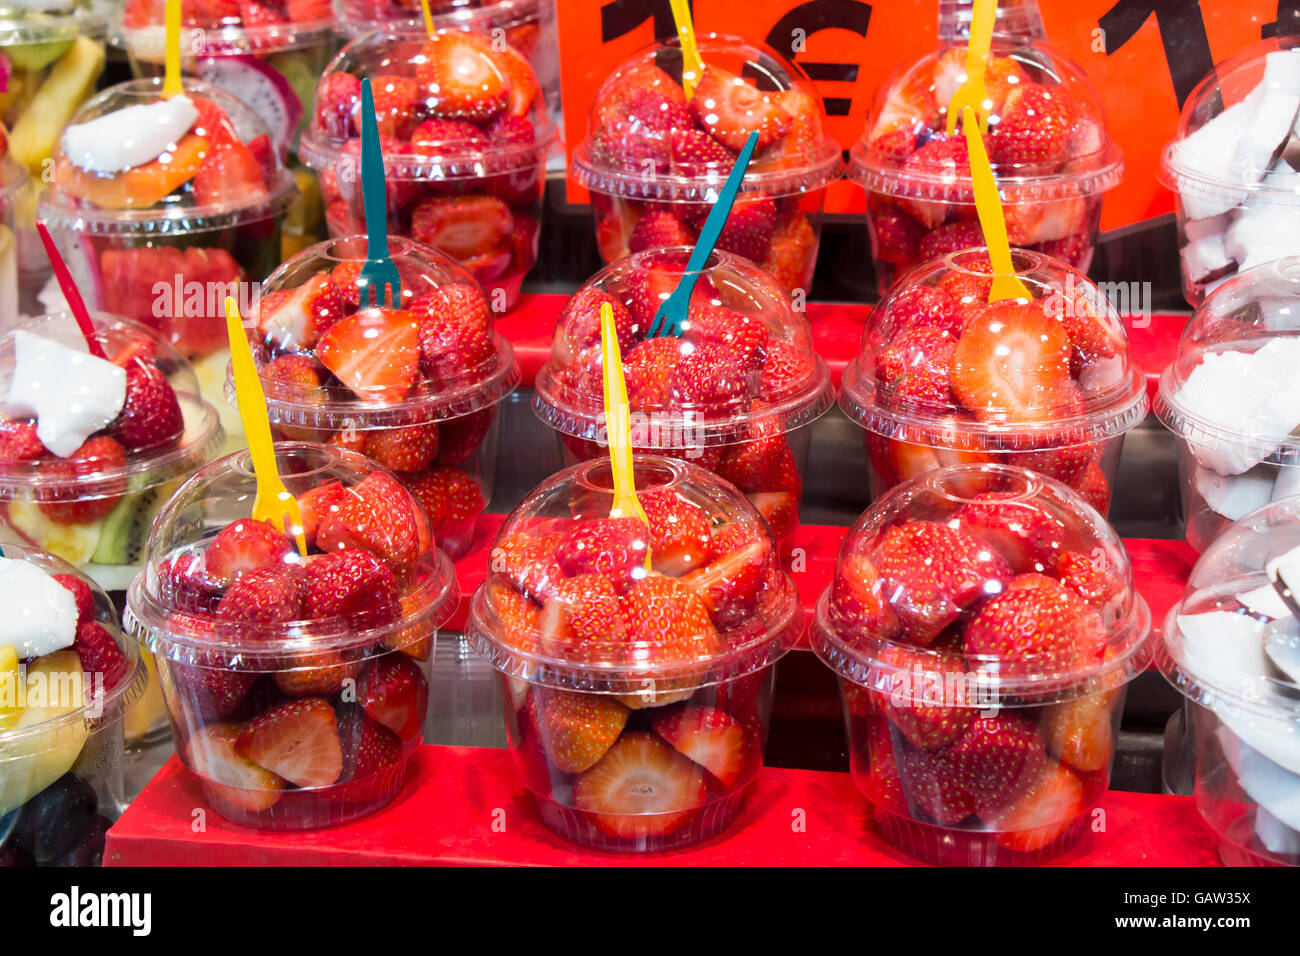 Fresh Strawberry cocktail salad in plastic cups on a market stall Stock Photo